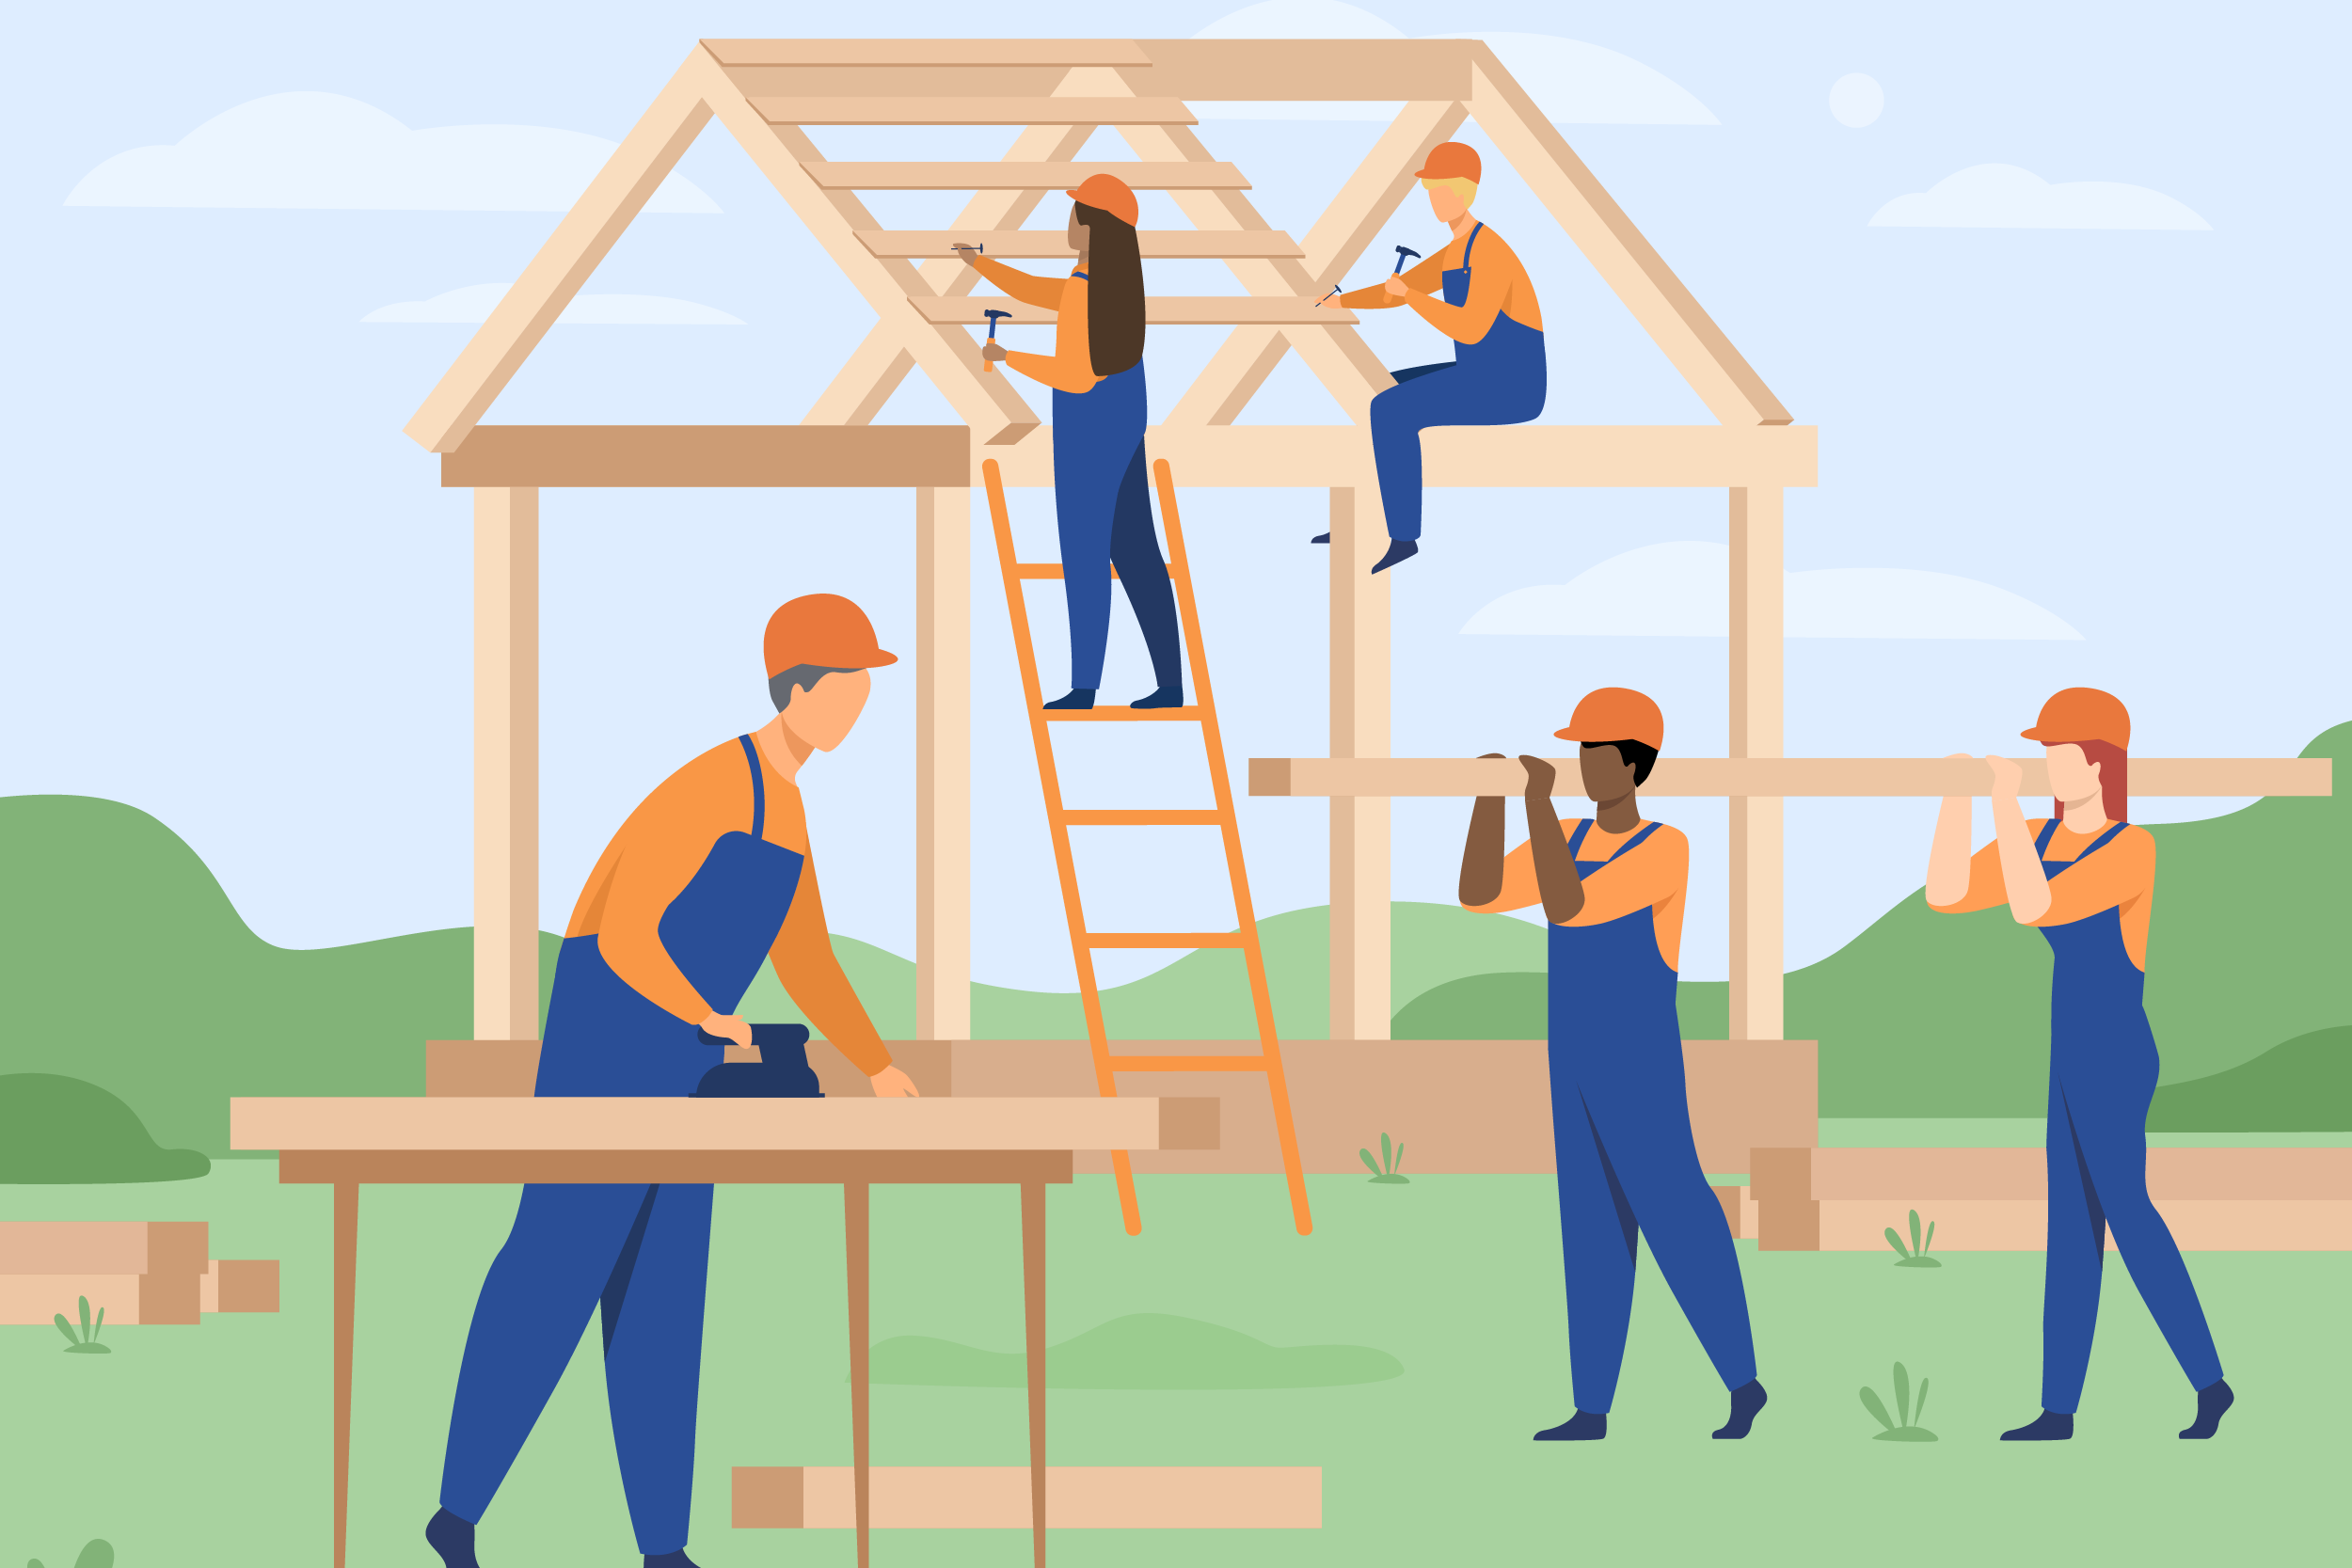 Graphic of construction workers on a ladder while constructing a building.